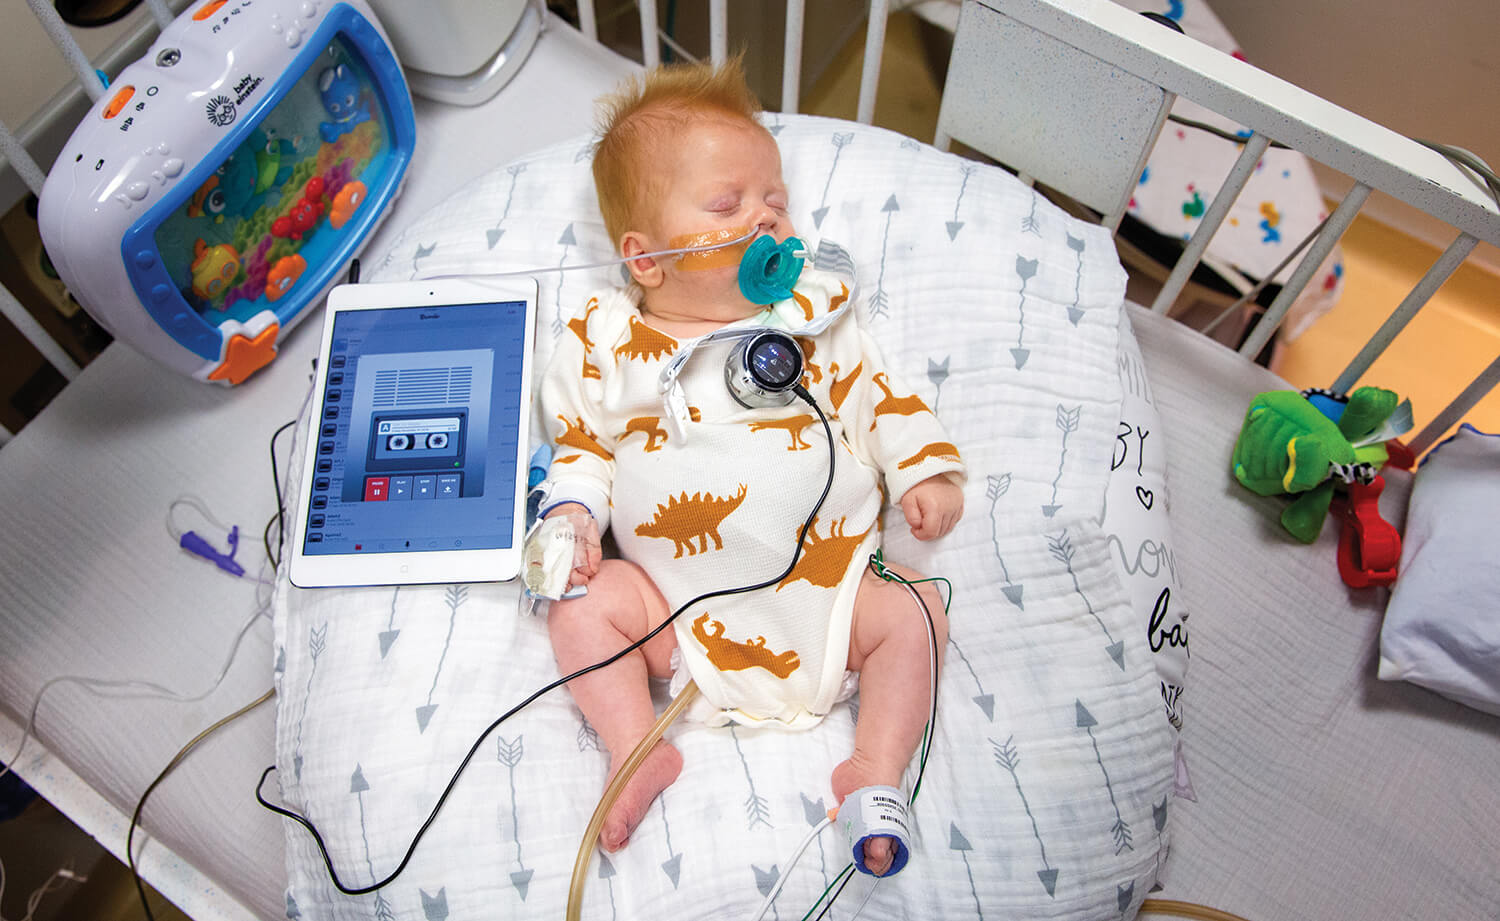 Dane Scott Sanford snoozes while his heartbeat is recorded at Texas Children’s Hospital for use in an original song for his family.